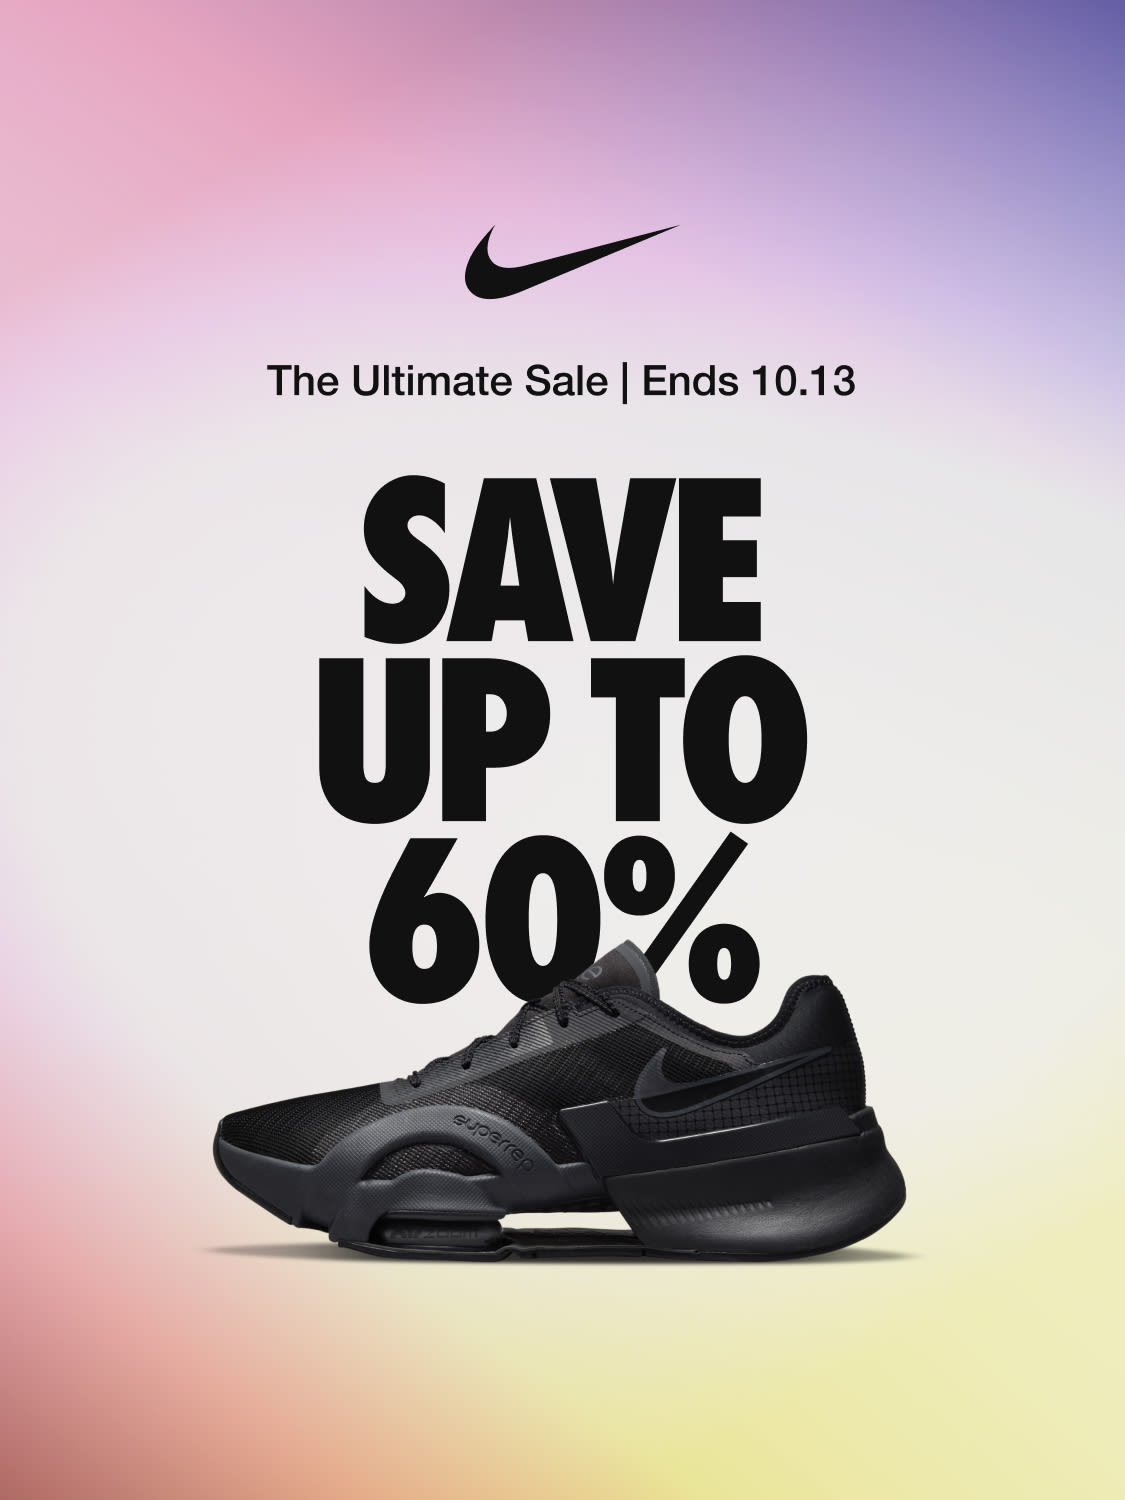 - The Ultimate Sale Ends 10.13 SAVE UP TO 